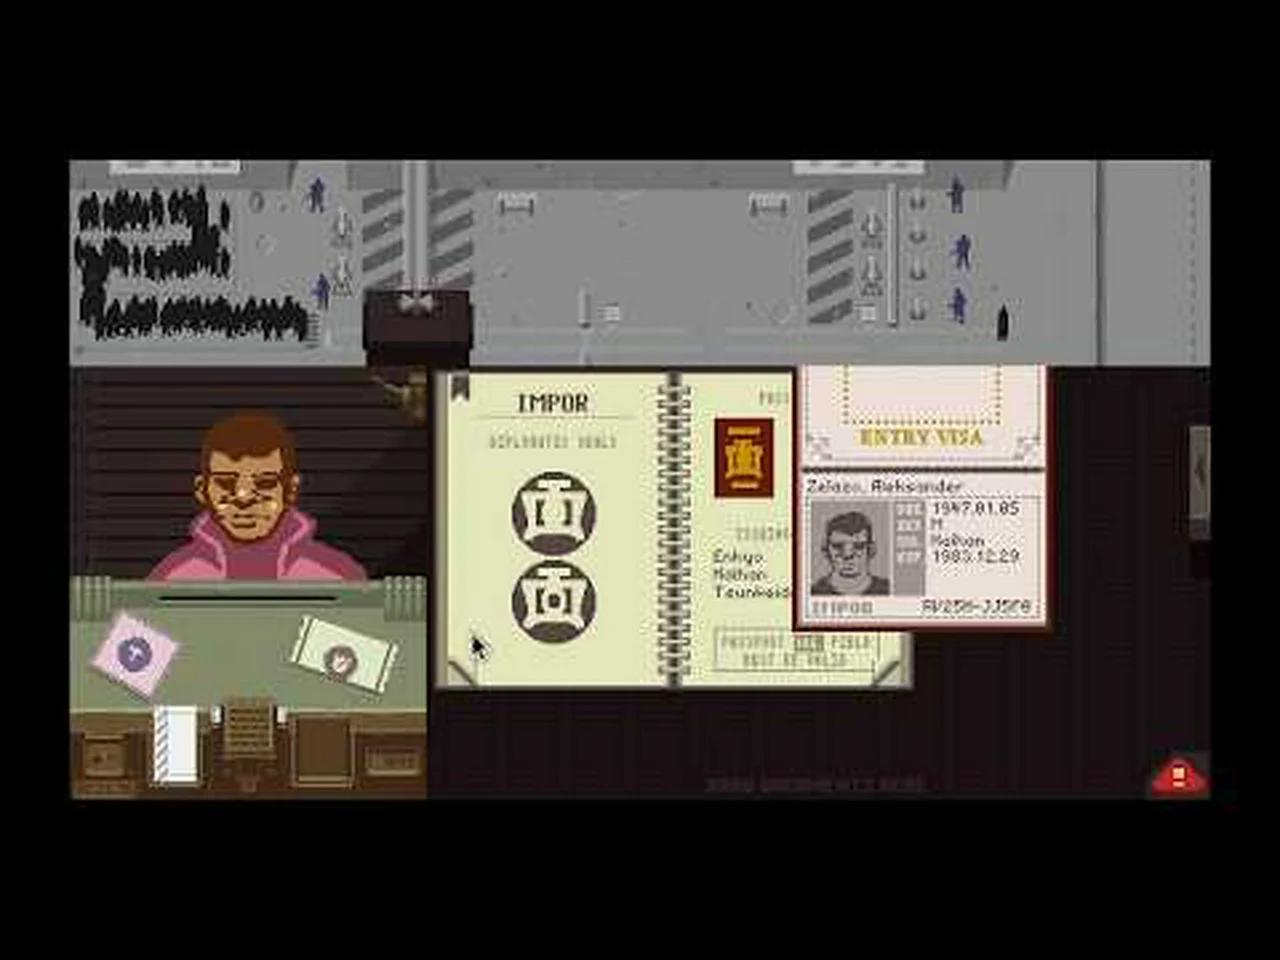 That s not my neighbor papers please. Papers please сканер. Флаг Колечии papers please. Как использовать сканер в papers please. Бумаги из Пэйпер плиз.